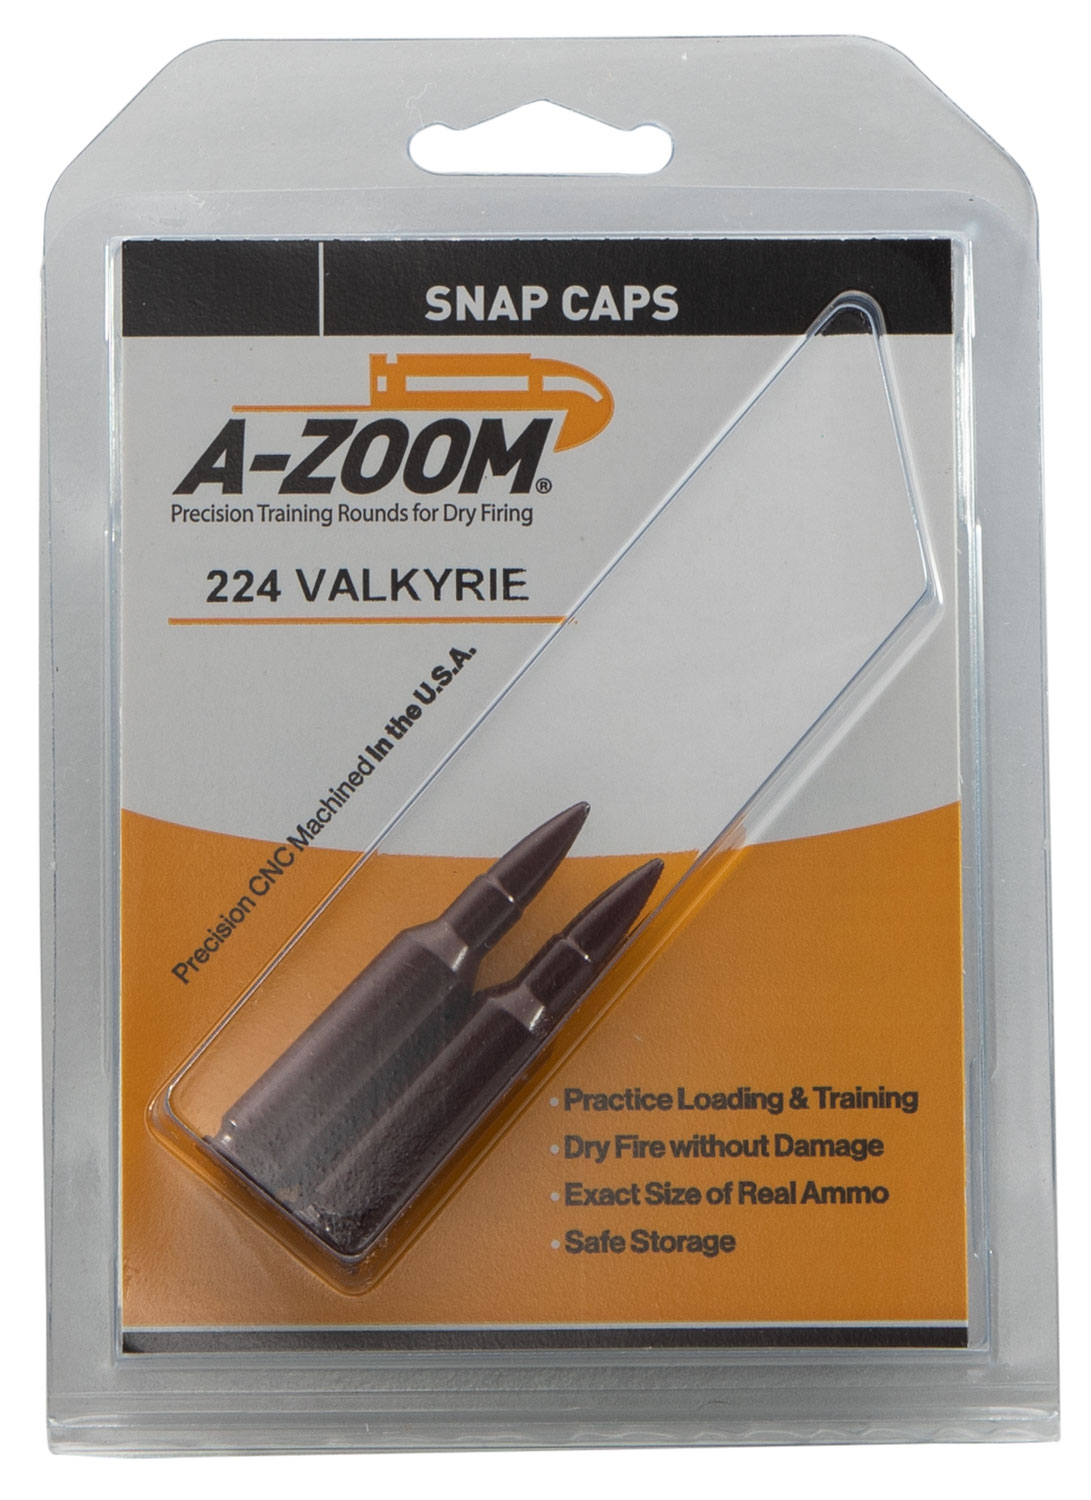 A-ZOOM METAL SNAP CAP .224 VALKYRIE 2-PACK